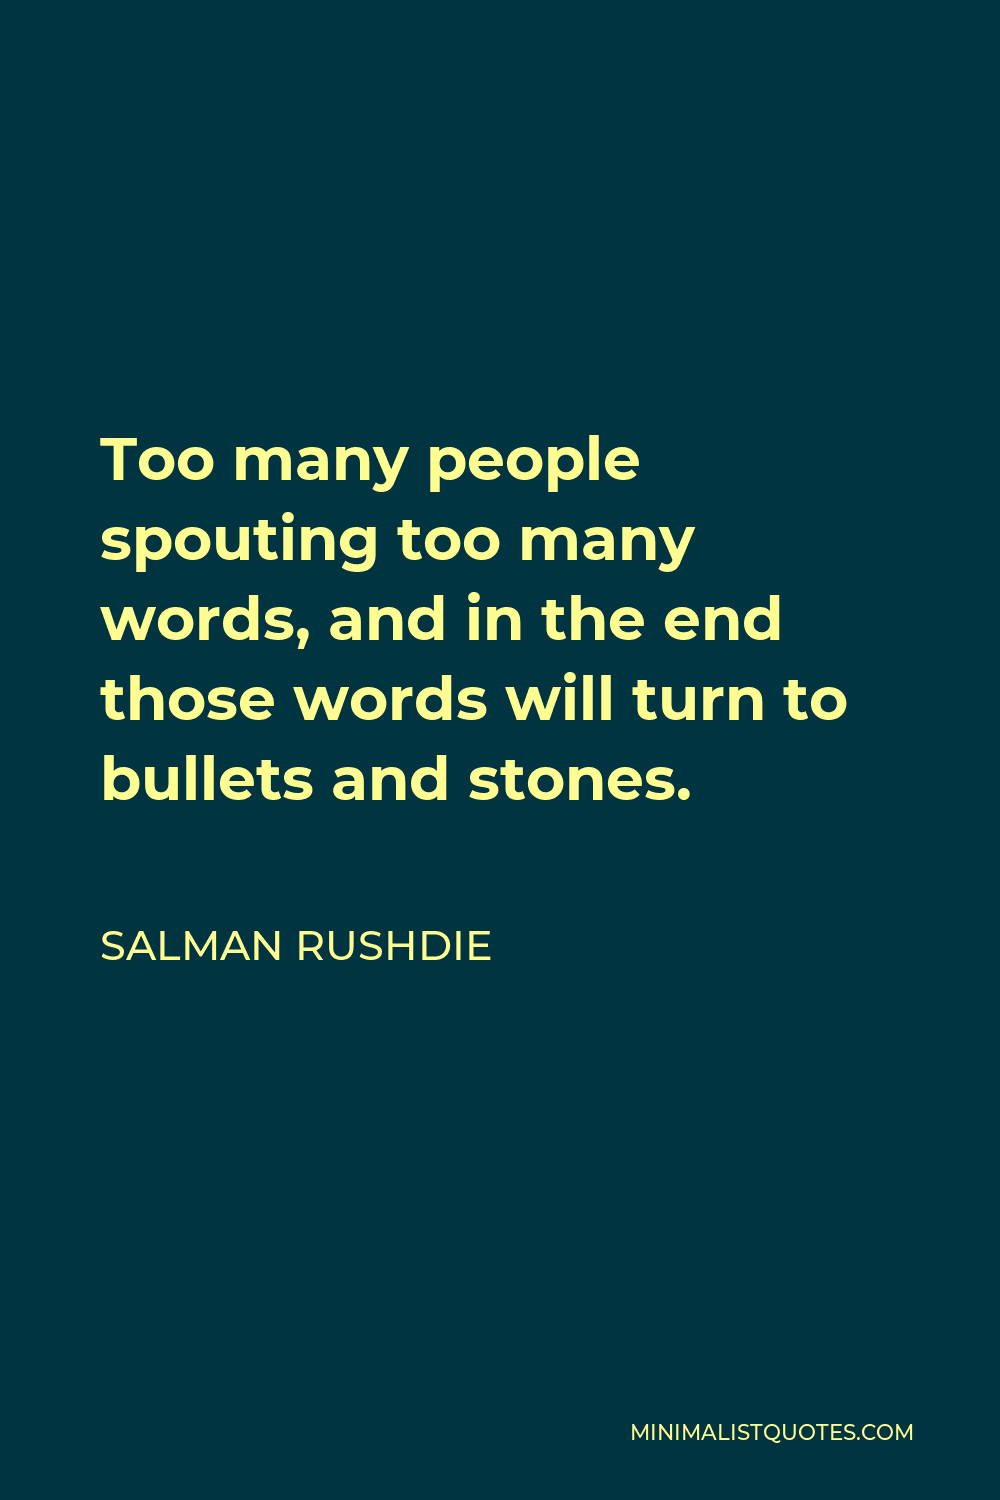 Salman Rushdie Quote - Too many people spouting too many words, and in the end those words will turn to bullets and stones.